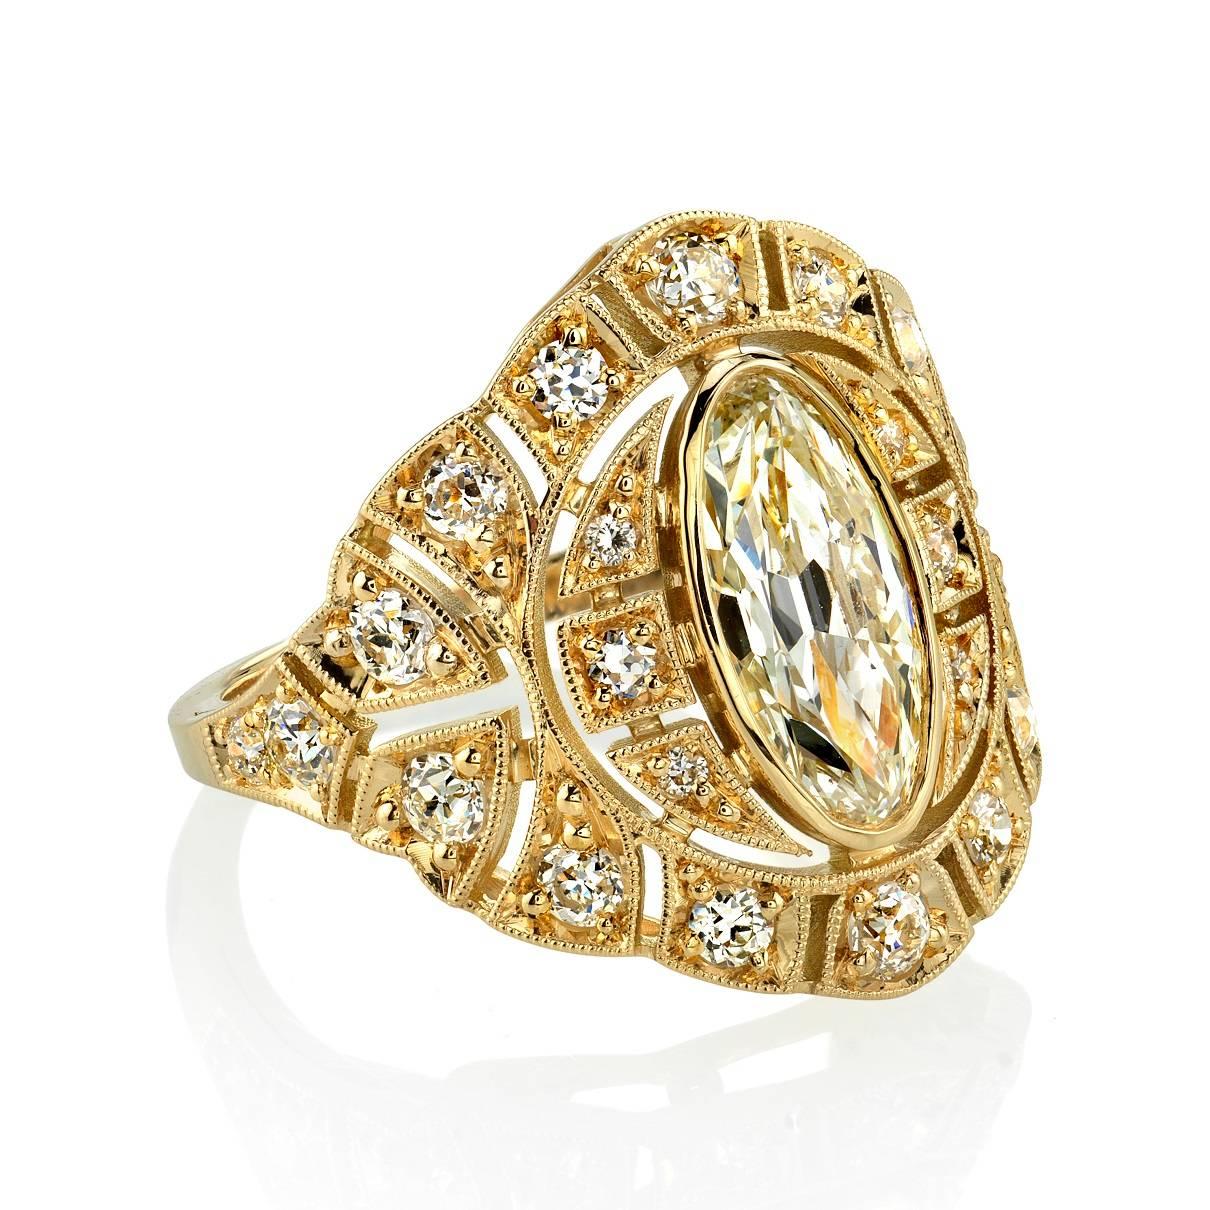 1.49ct M/SI2 GIA certified Marquise cut diamond set in a handcrafted 18k yellow gold mounting. An Edwardian inspired design that features a low profile. Ring is currently a size 6 and can be sized to fit. 